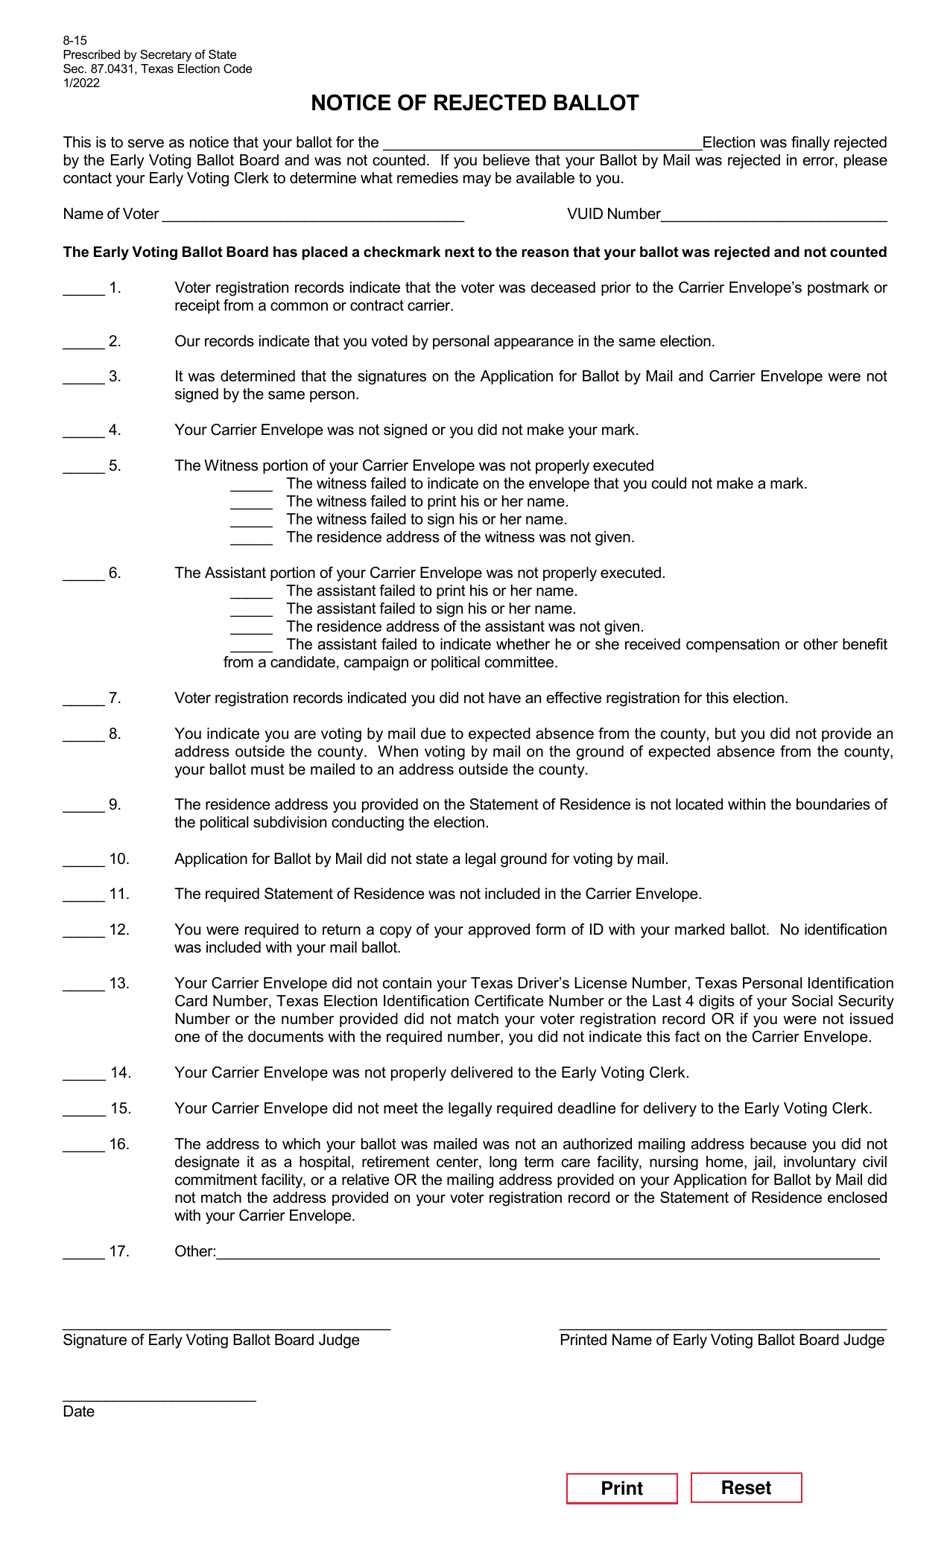 Form 8-15 Notice of Rejected Ballot - Texas (English / Spanish), Page 1